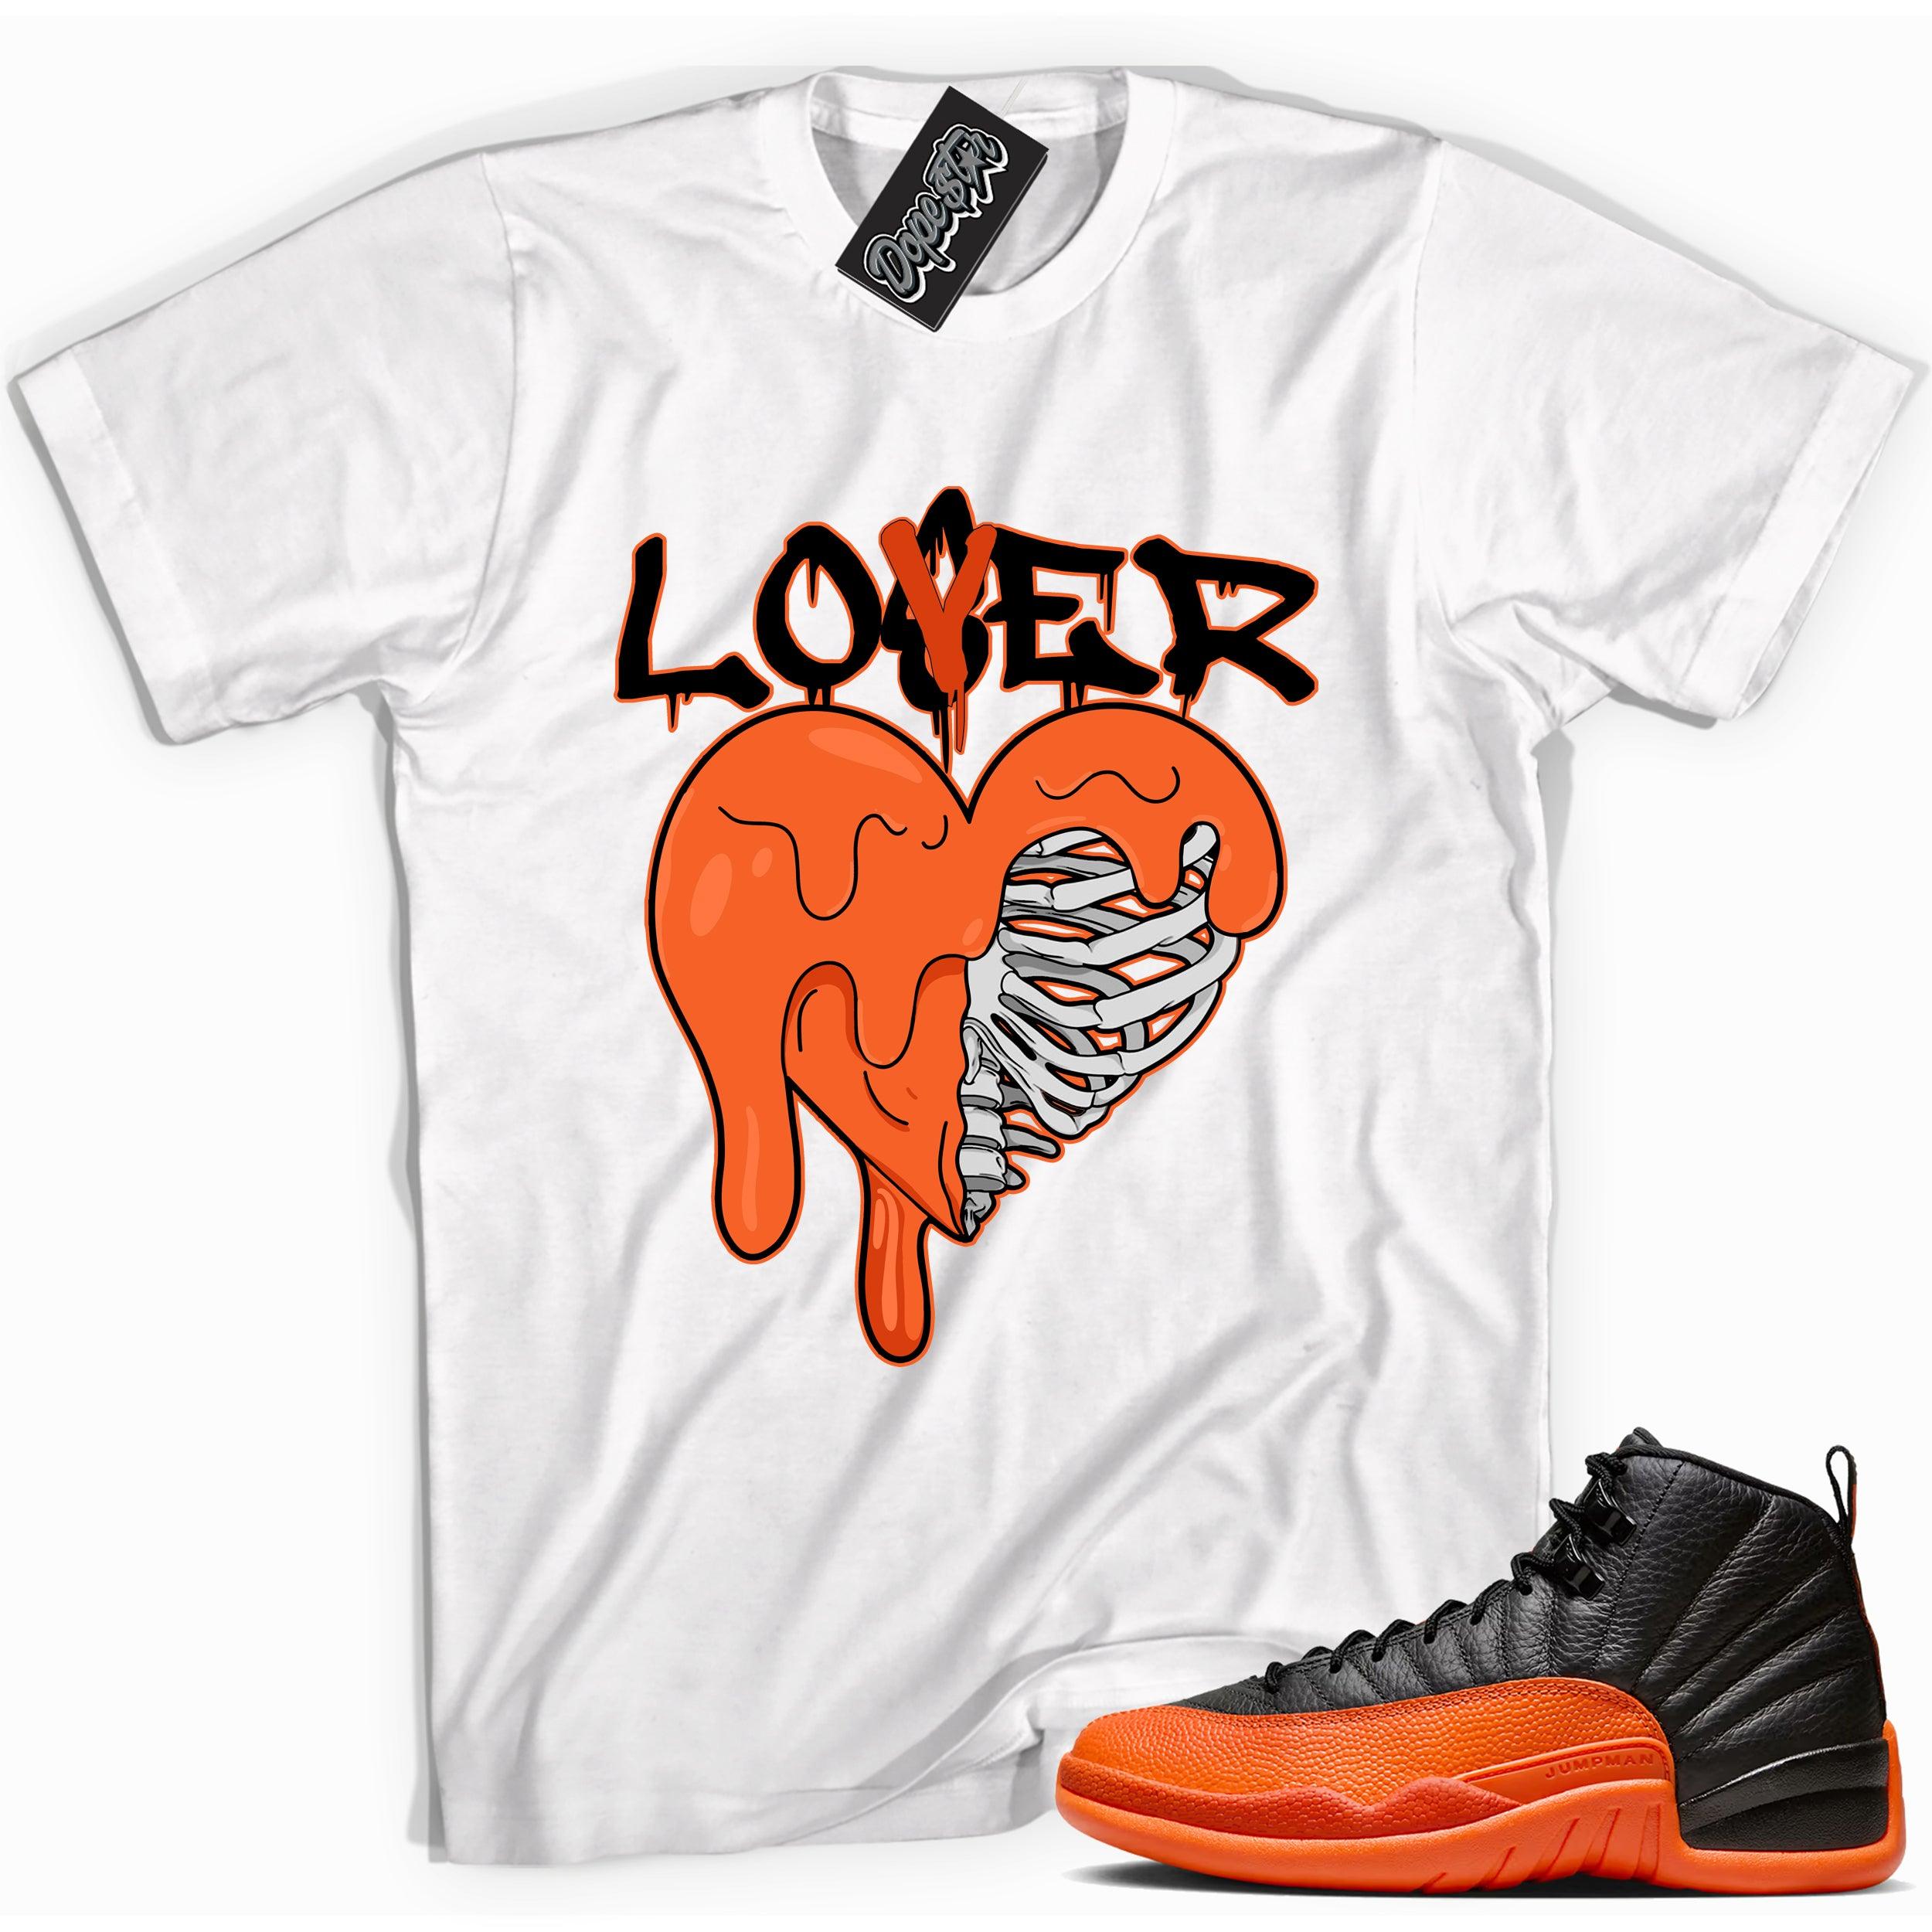 Cool White graphic tee with “ Lover Loser ” print, that perfectly matches Air Jordan 12 Retro WNBA All-Star Brilliant Orange sneakers 